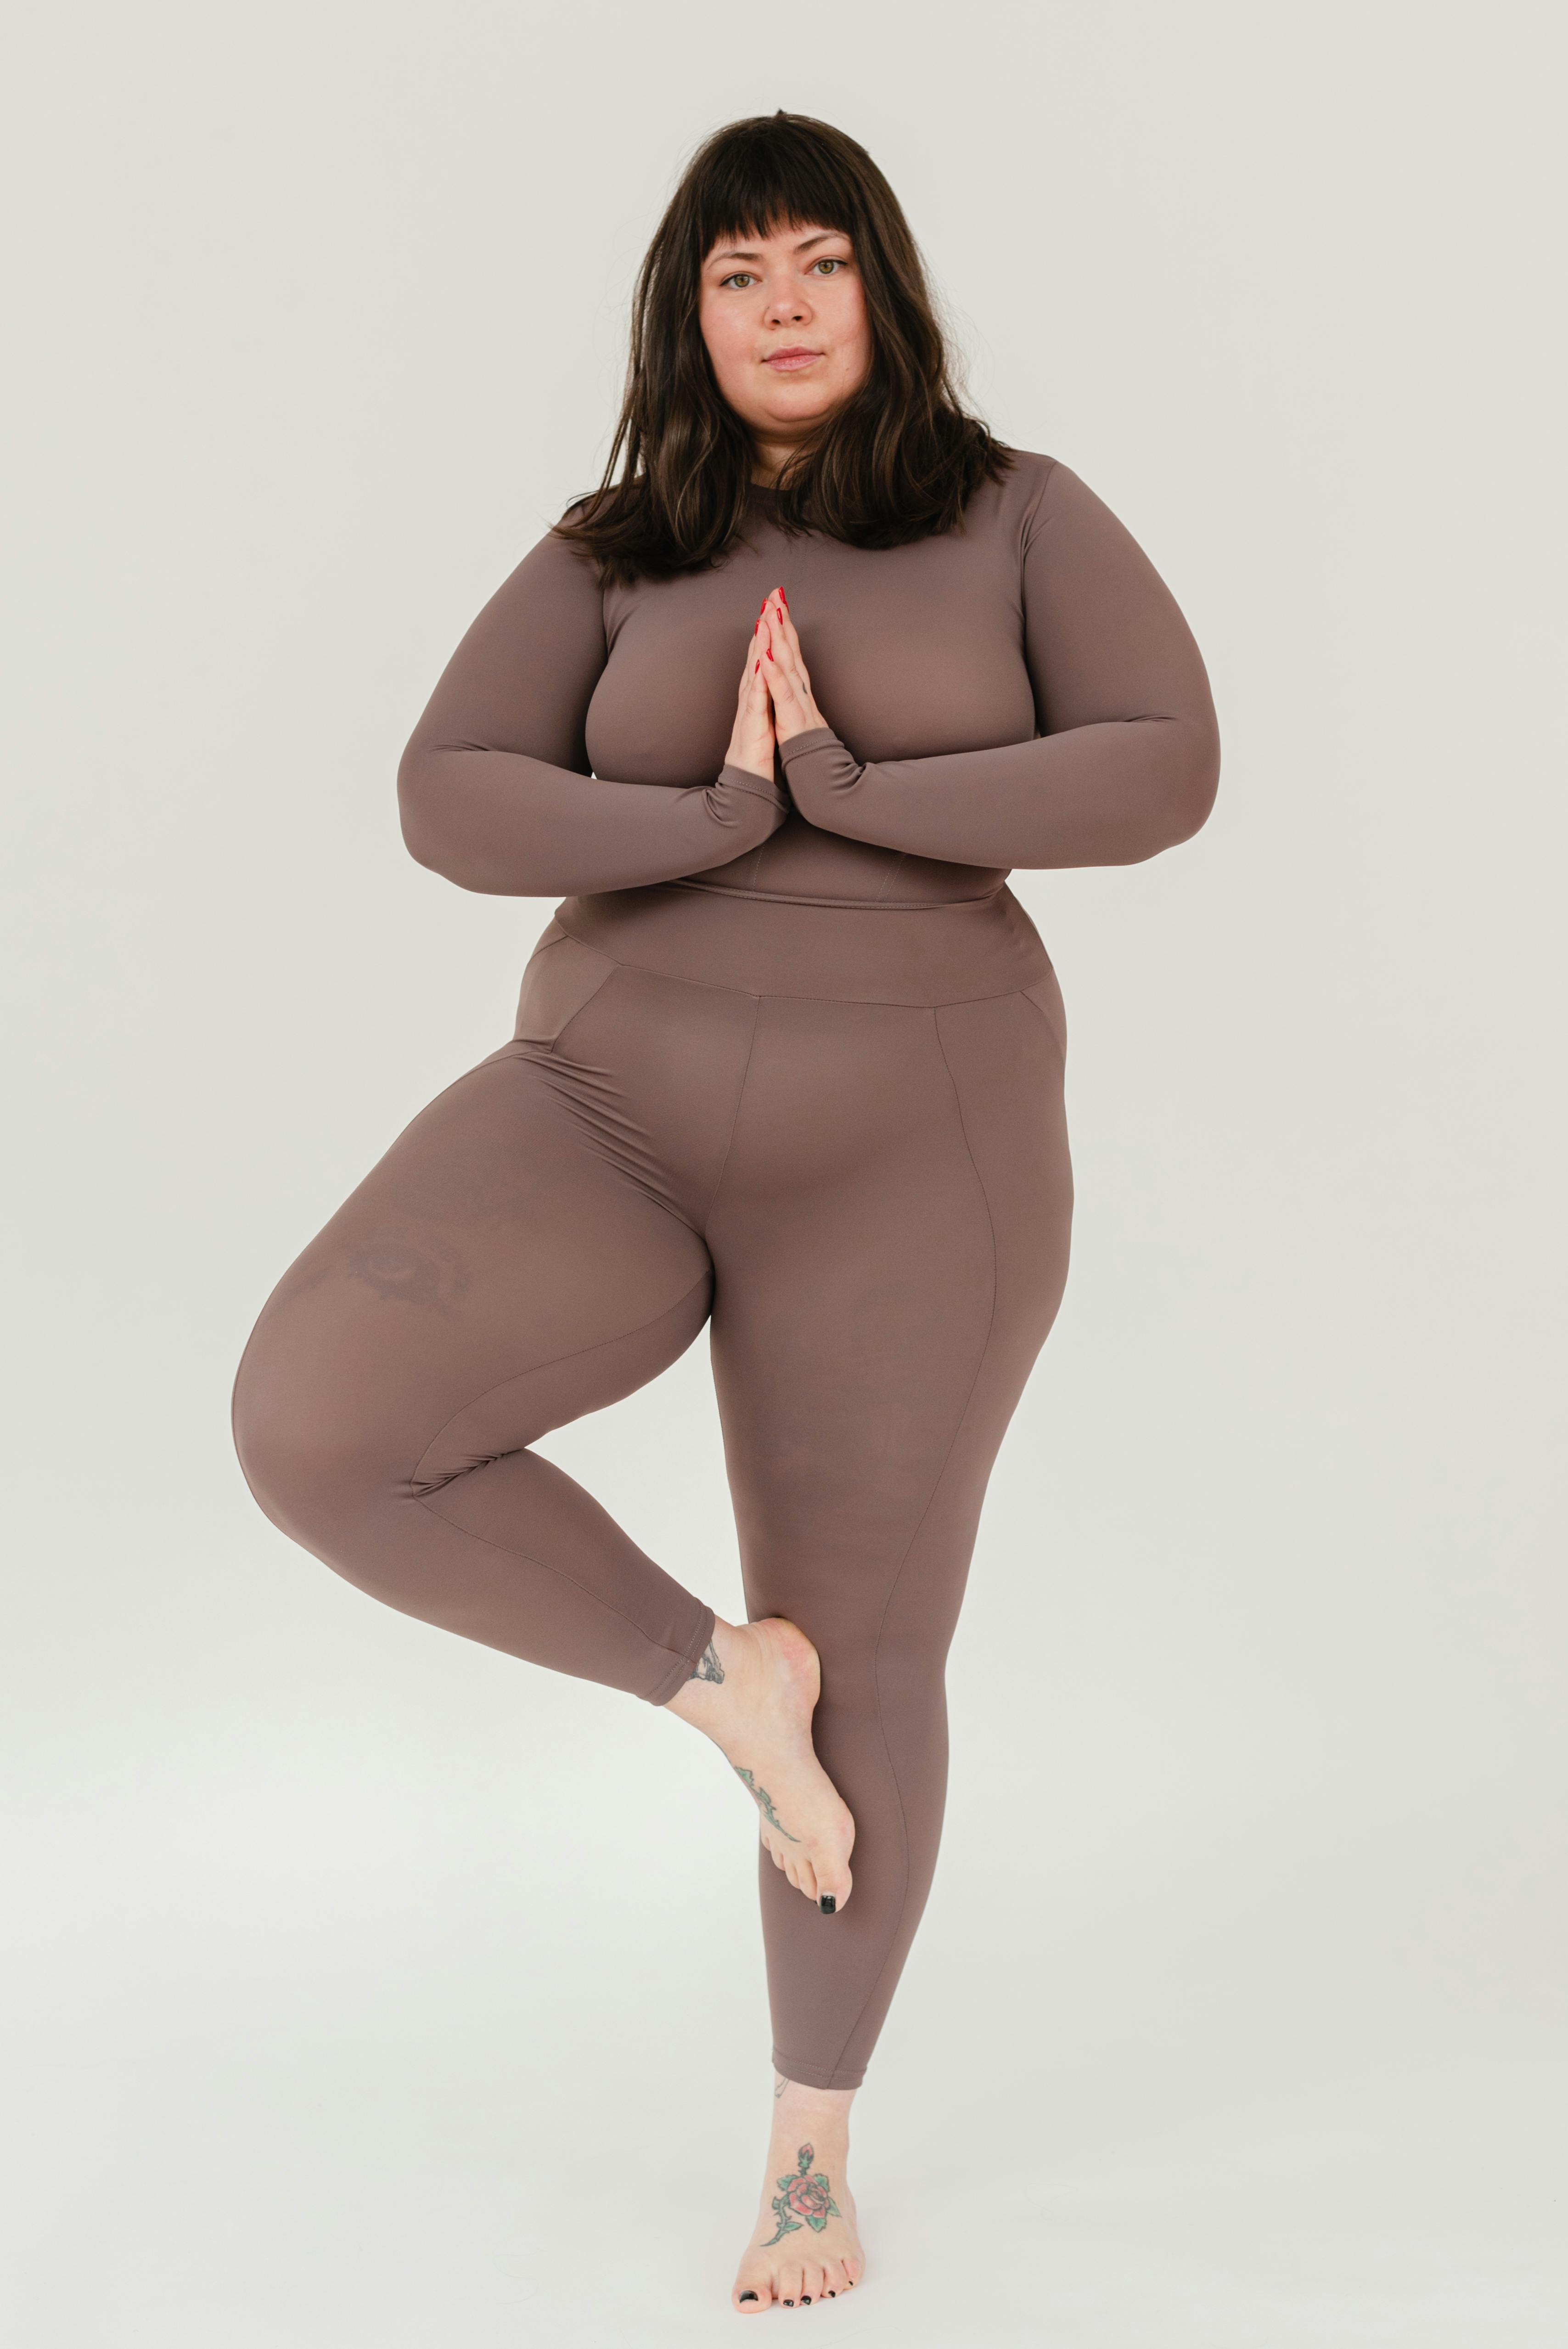 overweight young woman practicing tree asana during yoga lesson